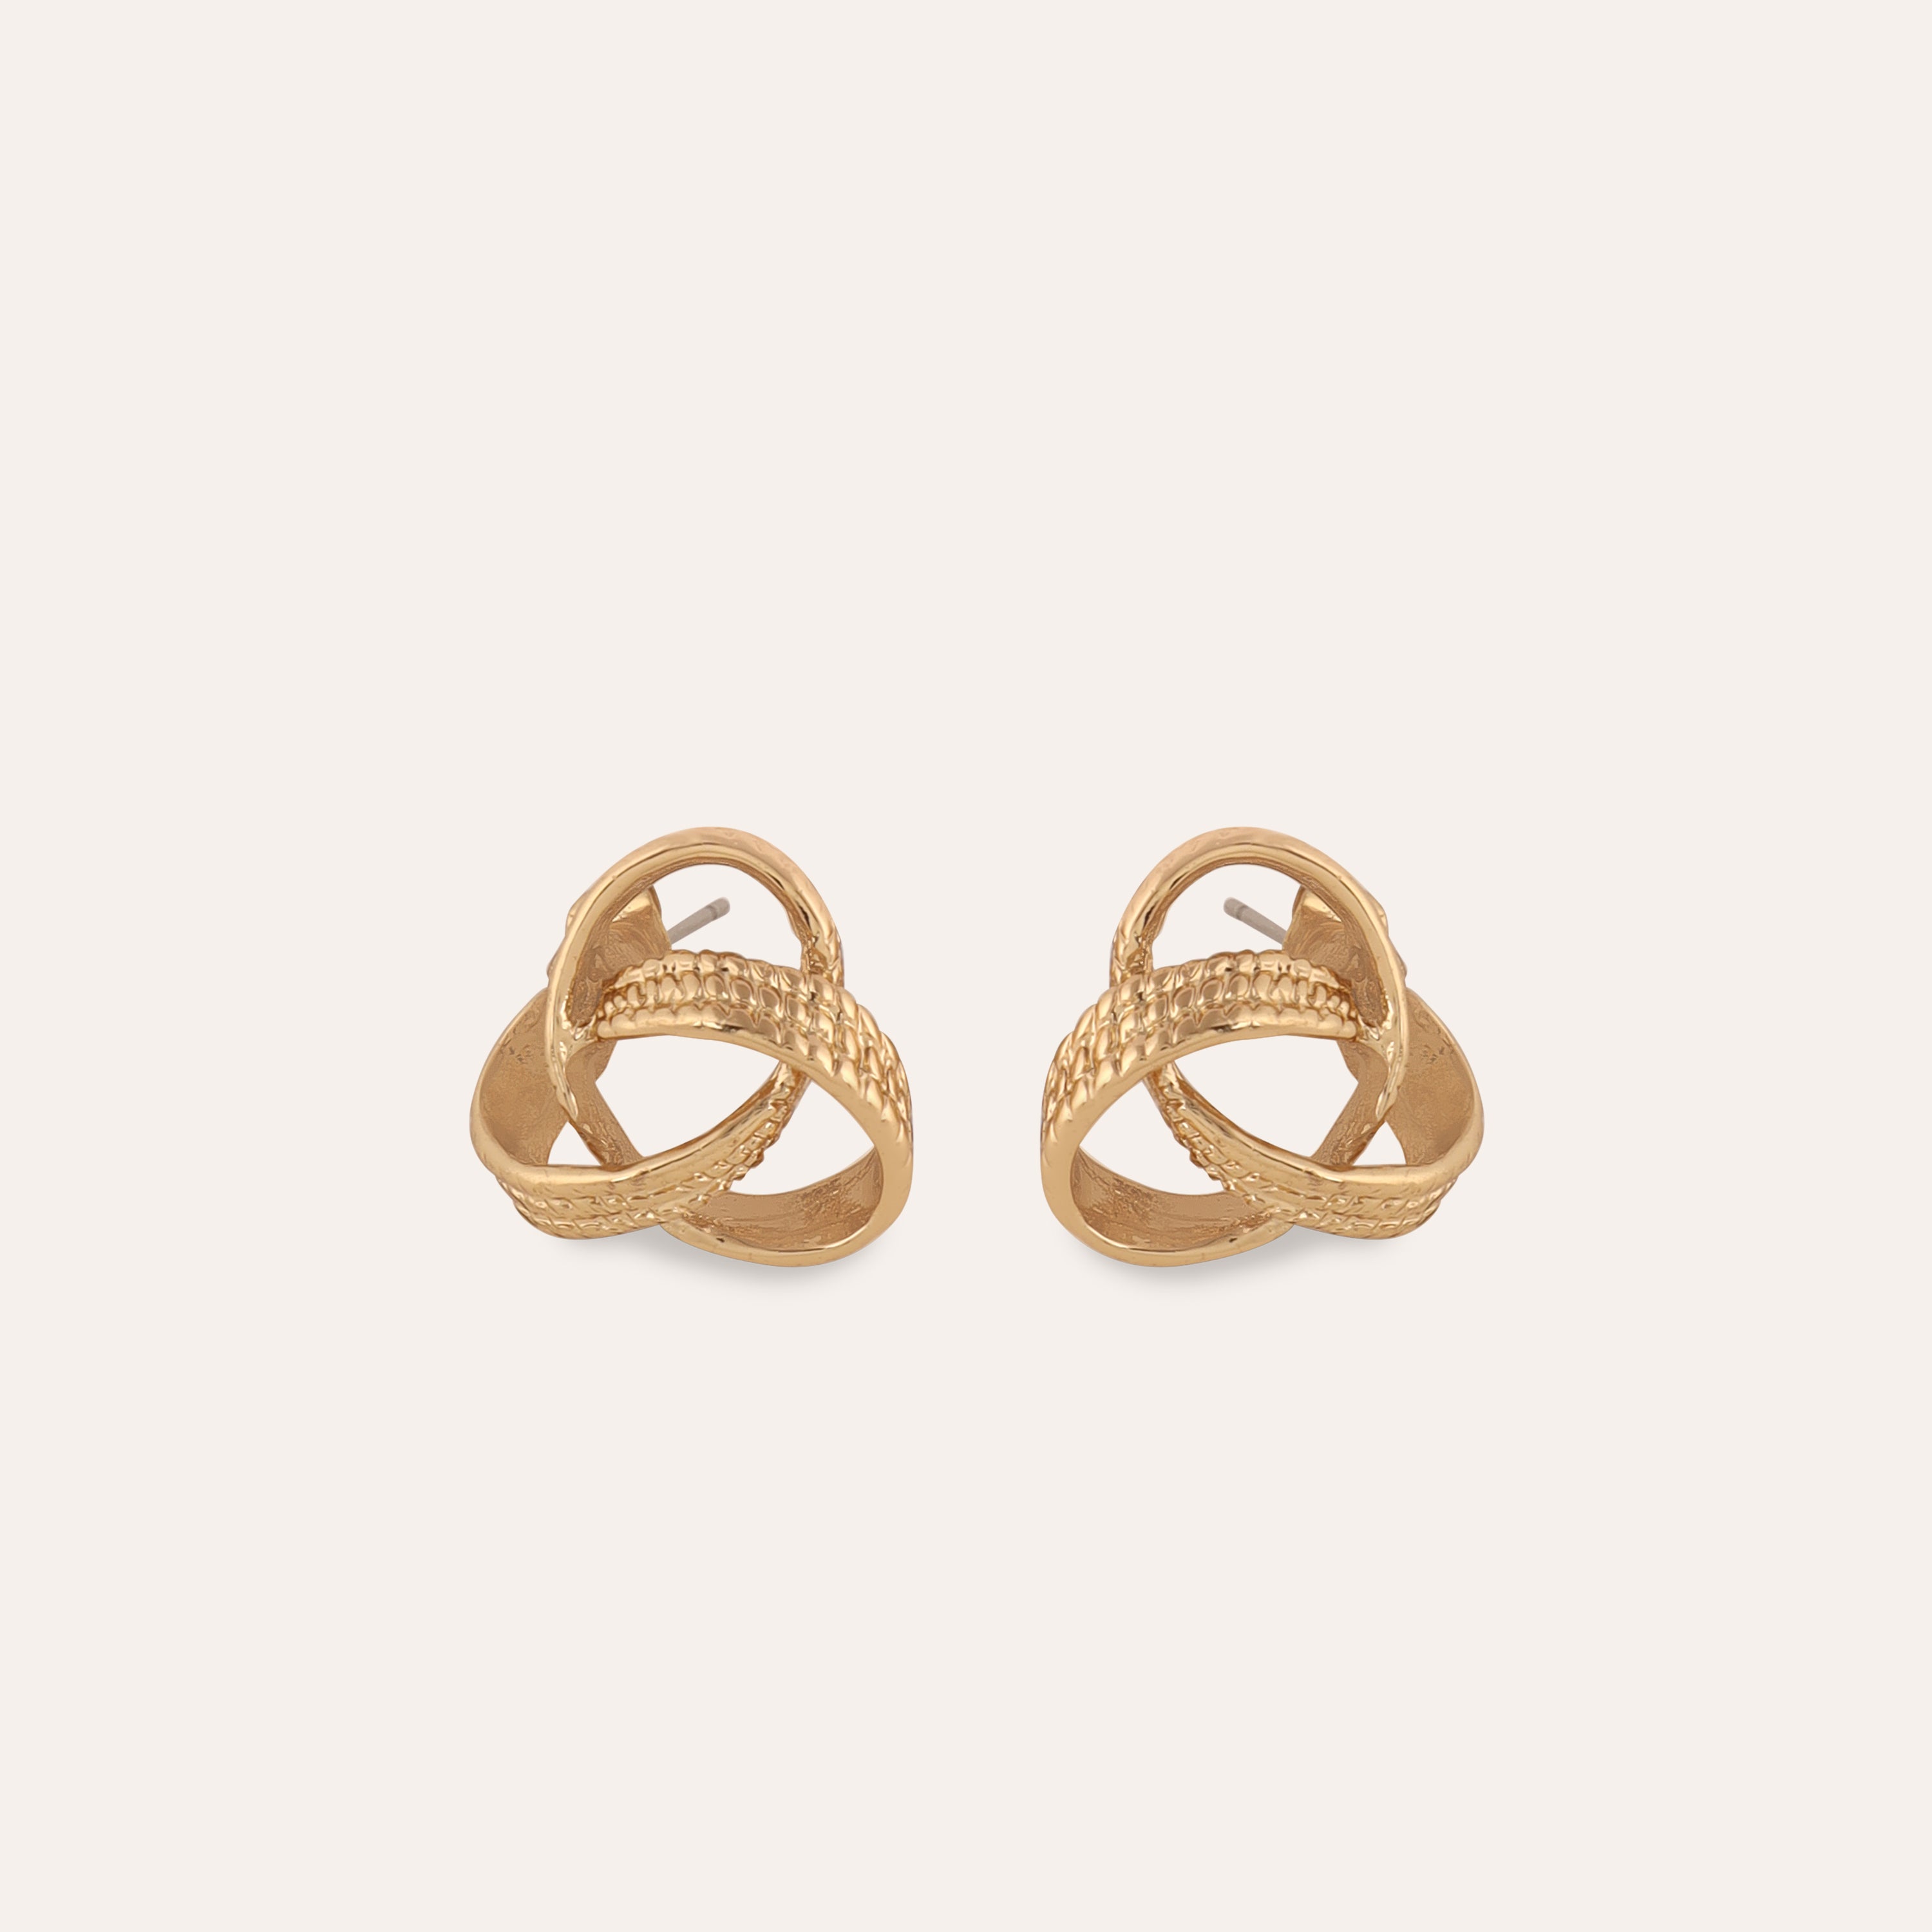 TFC Infinity Gold Plated Stud Earrings- Discover daily wear gold earrings including stud earrings, hoop earrings, and pearl earrings, perfect as earrings for women and earrings for girls.Find the cheapest fashion jewellery which is anti-tarnis​h only at The Fun company.